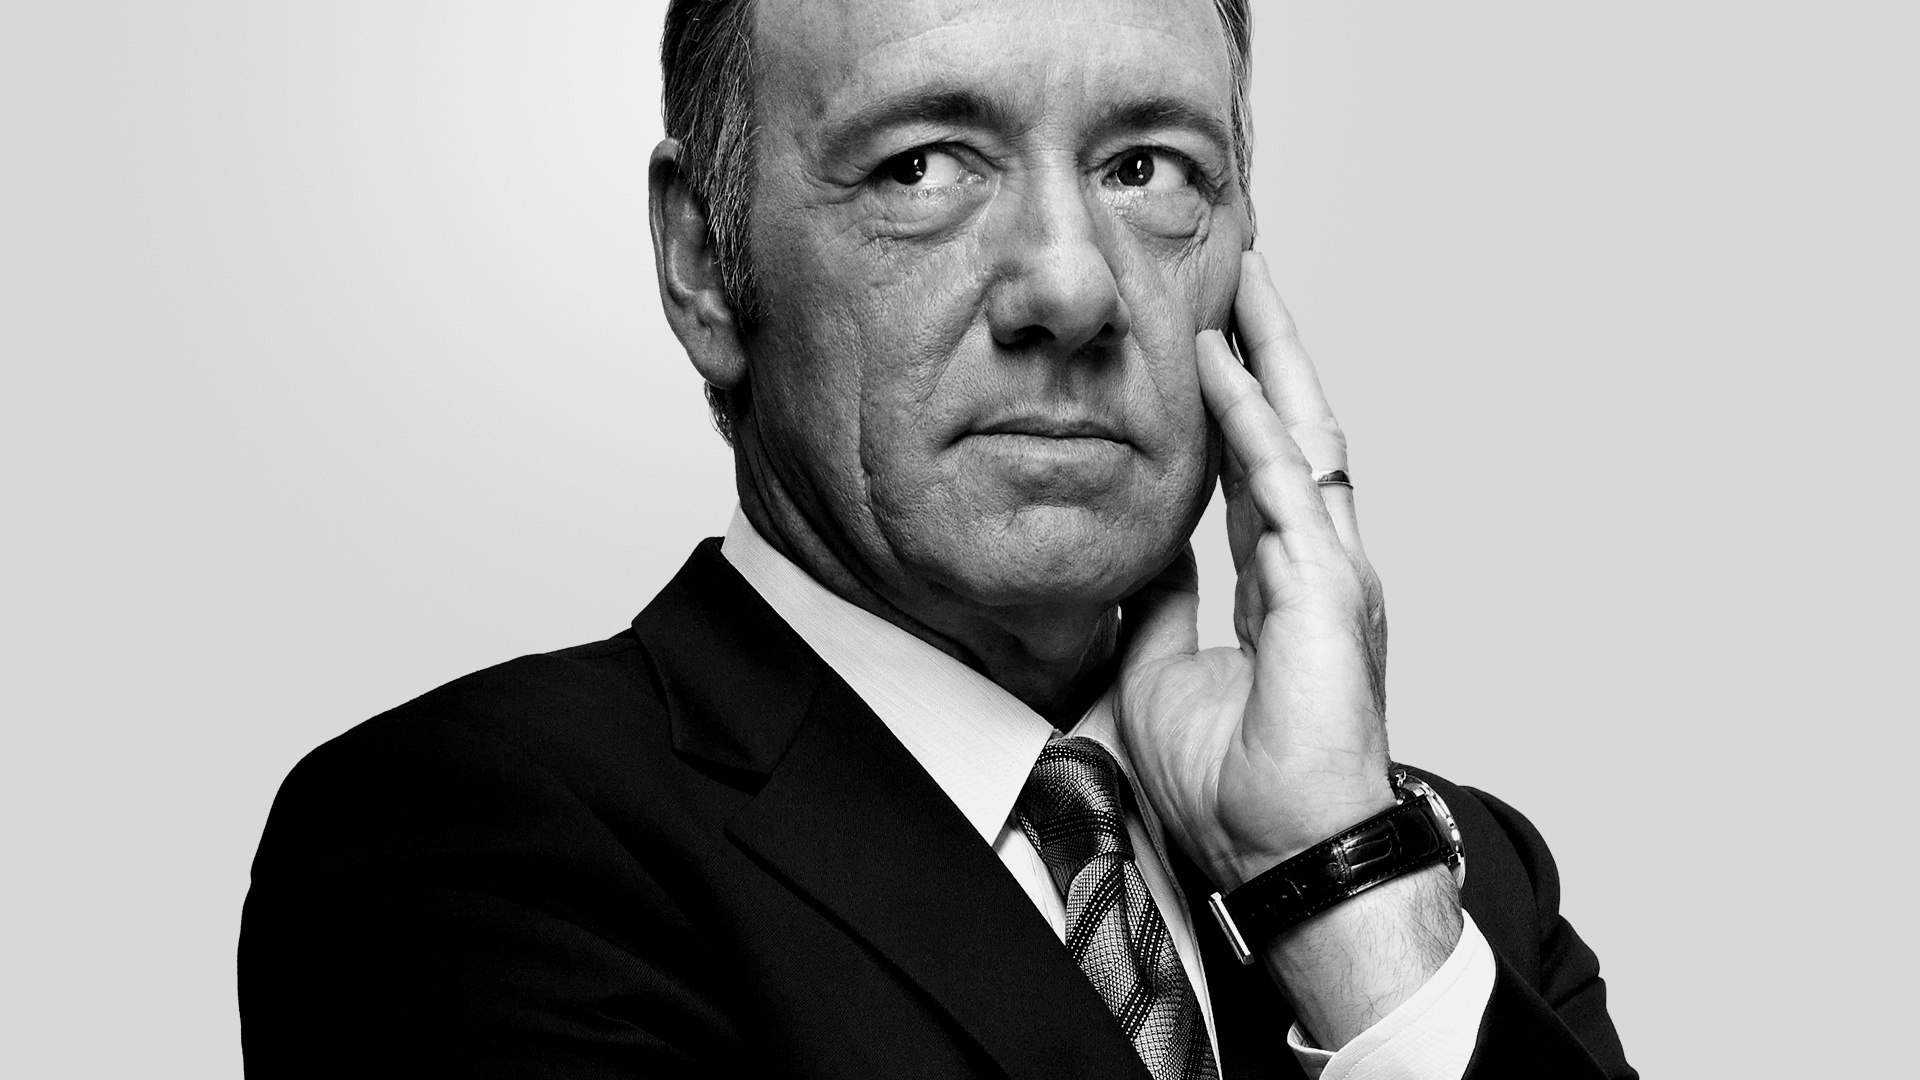 Kevin Spacey Wallpaper Image Photos Pictures Background